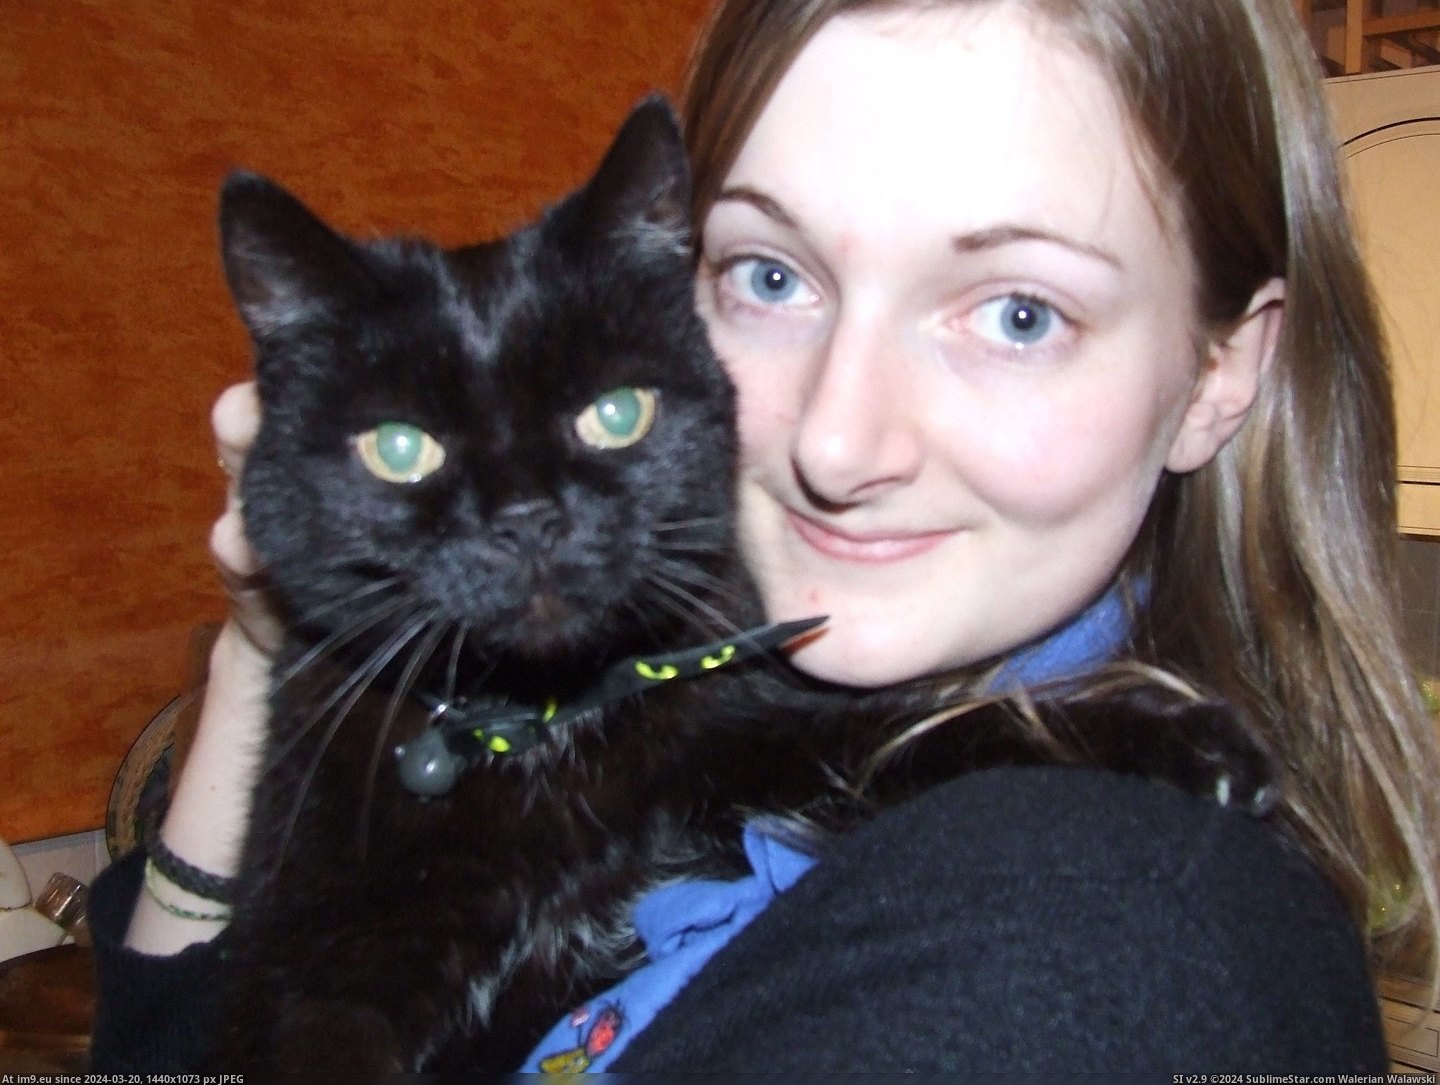 #Girl #Cats #Wonderful #Years #Beautiful [Cats] Me and my beautiful girl. We had 20 wonderful years together. Miss you forever. 1 Pic. (Image of album My r/CATS favs))